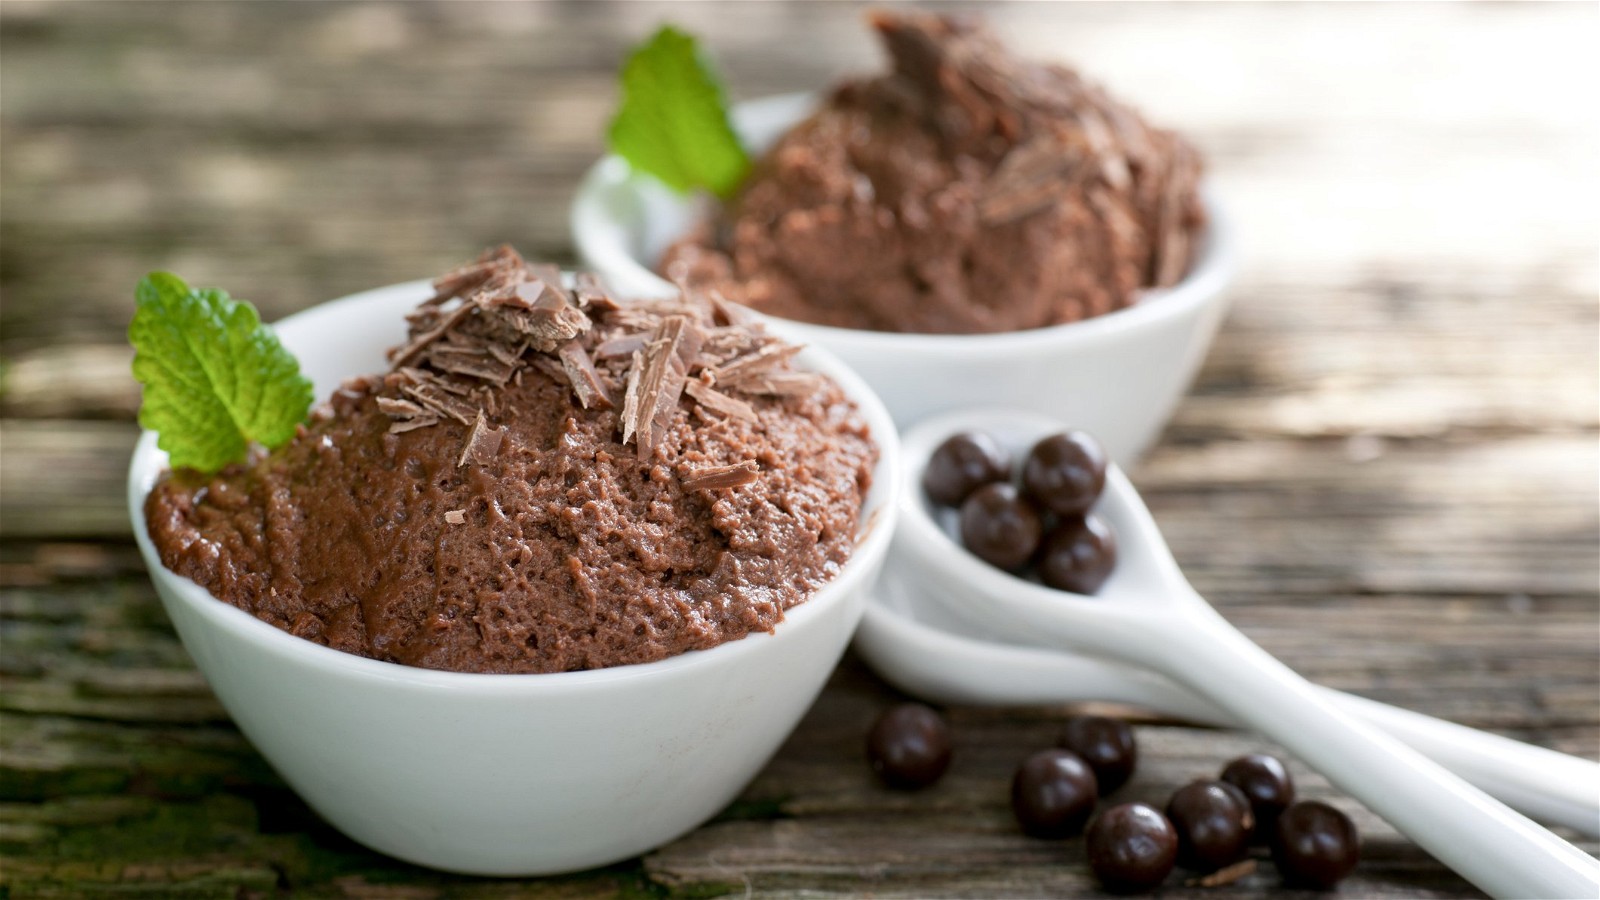 Image of SPICED CHOCOLATE MOUSSE WITH CHOCOLATE PEARLS